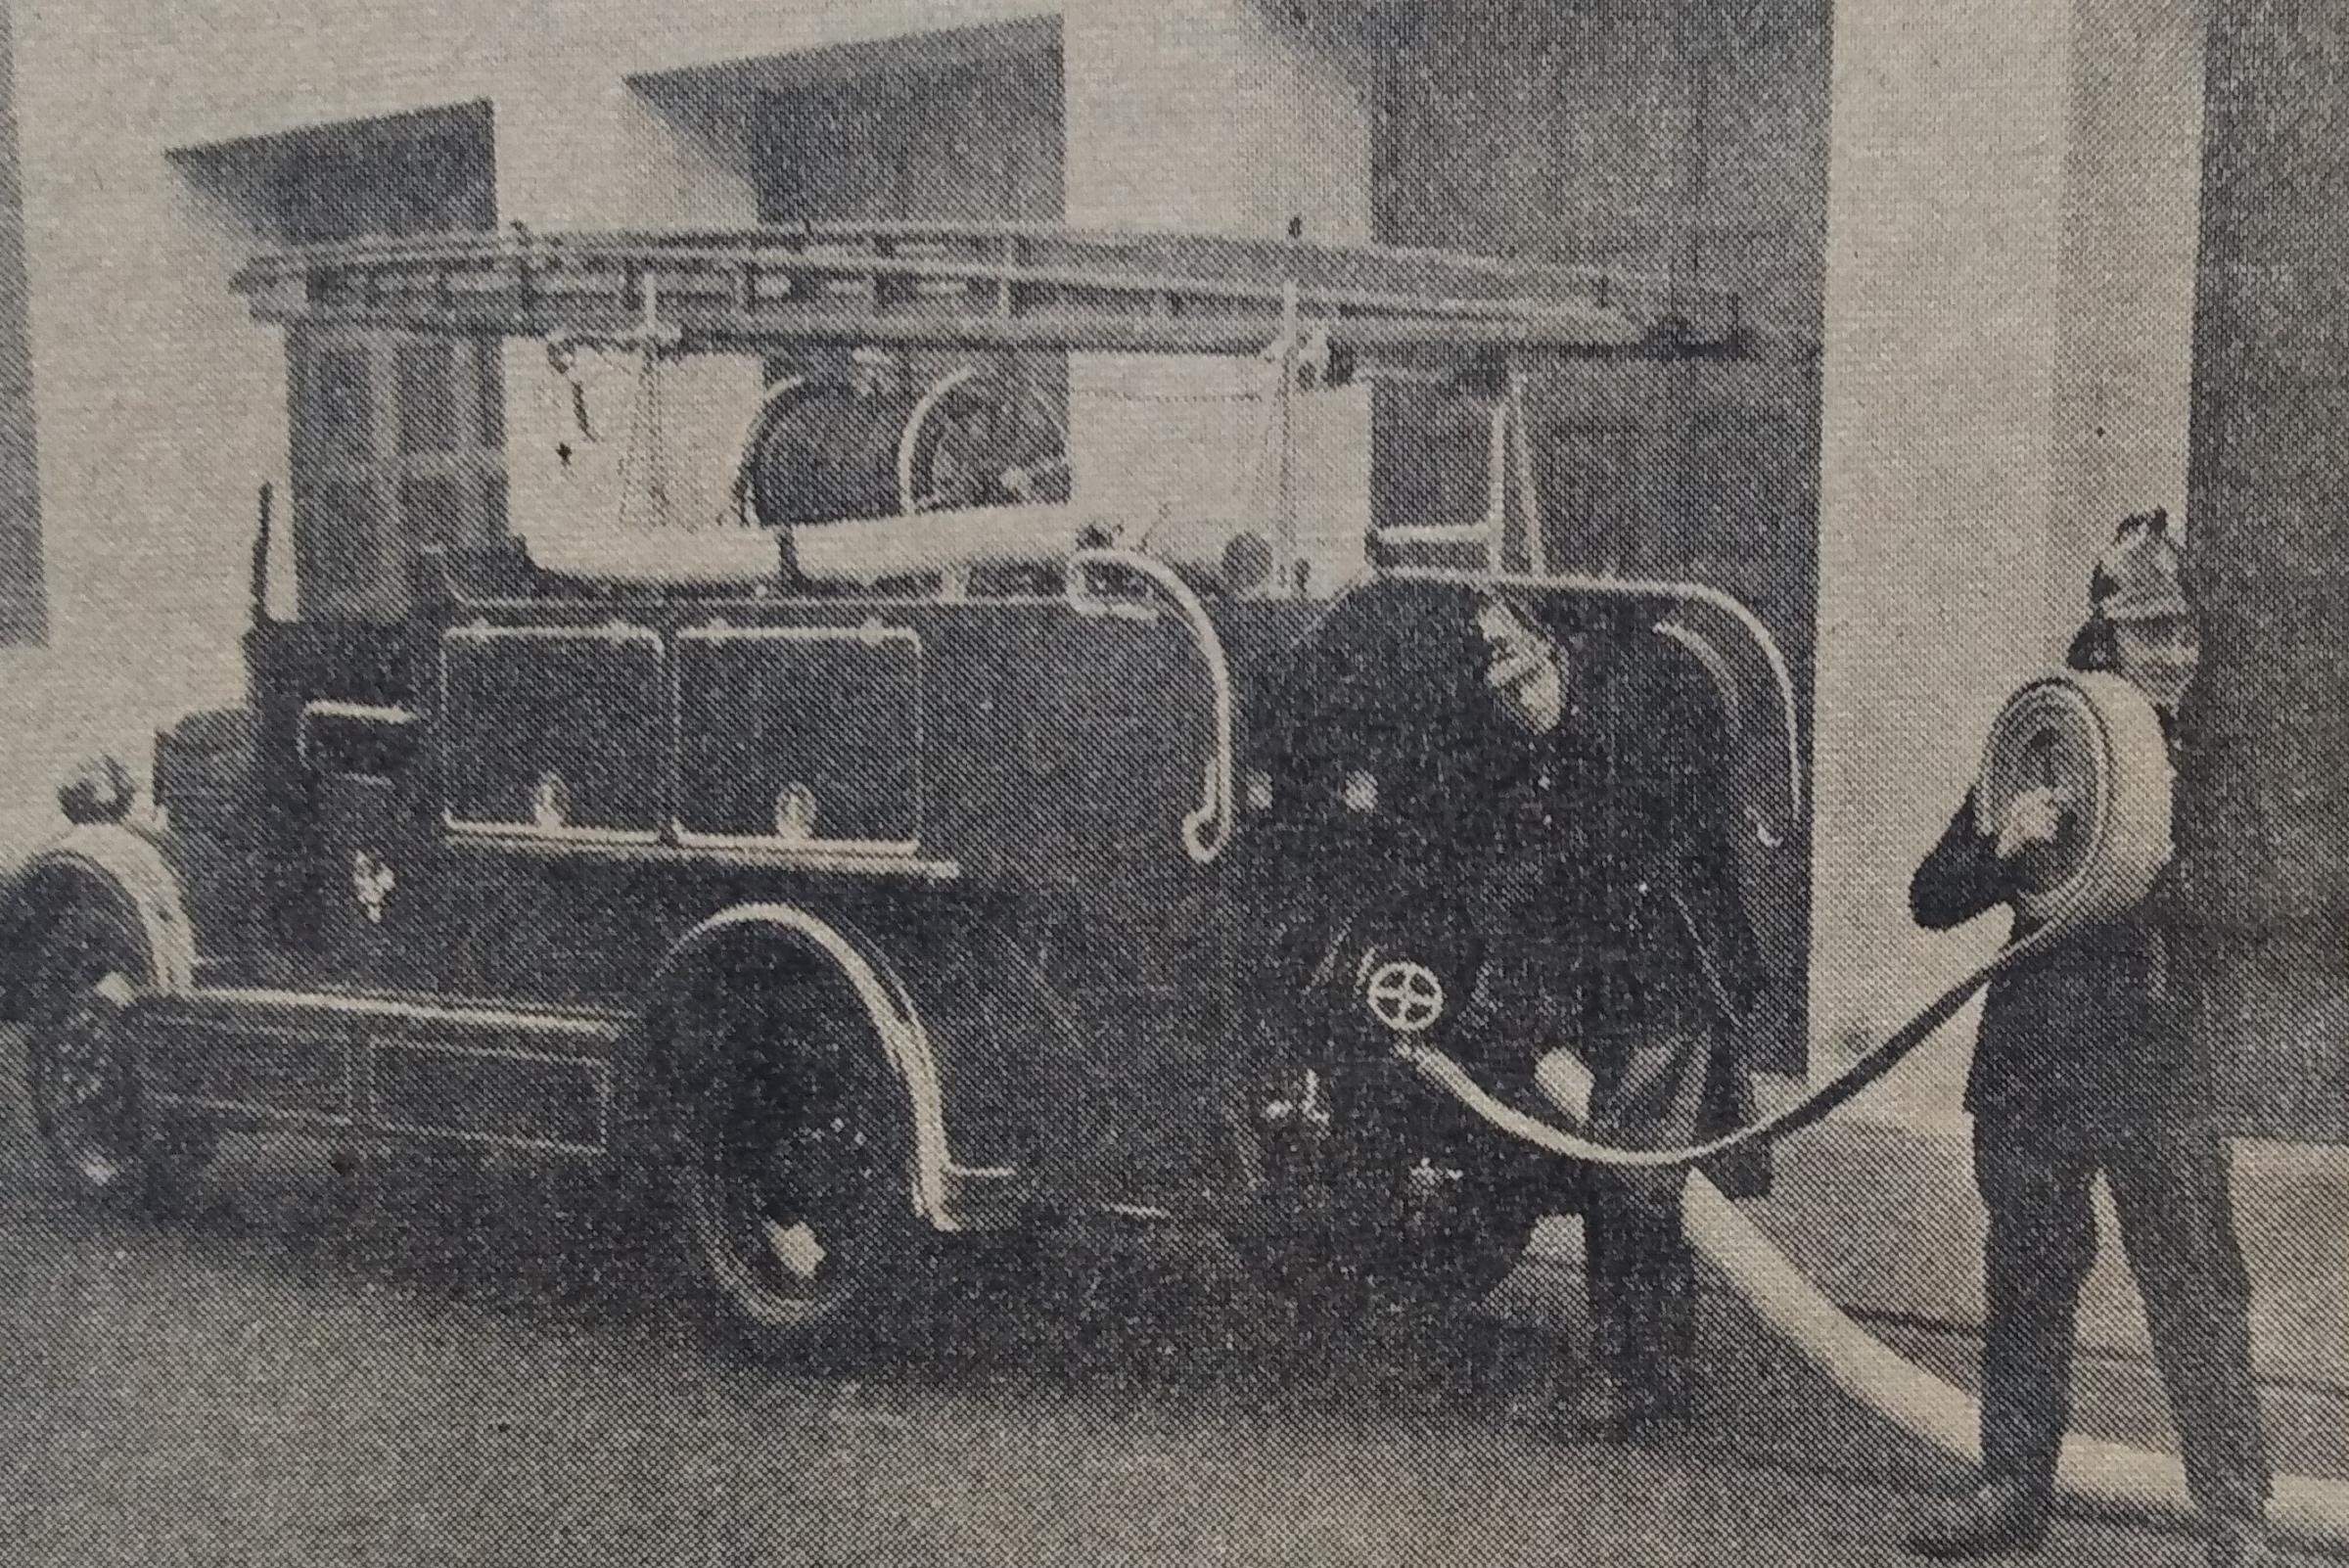 This one goes back a bit – all the way to January 1949 and a “gleaming up-to-date” fire engine for Pershore